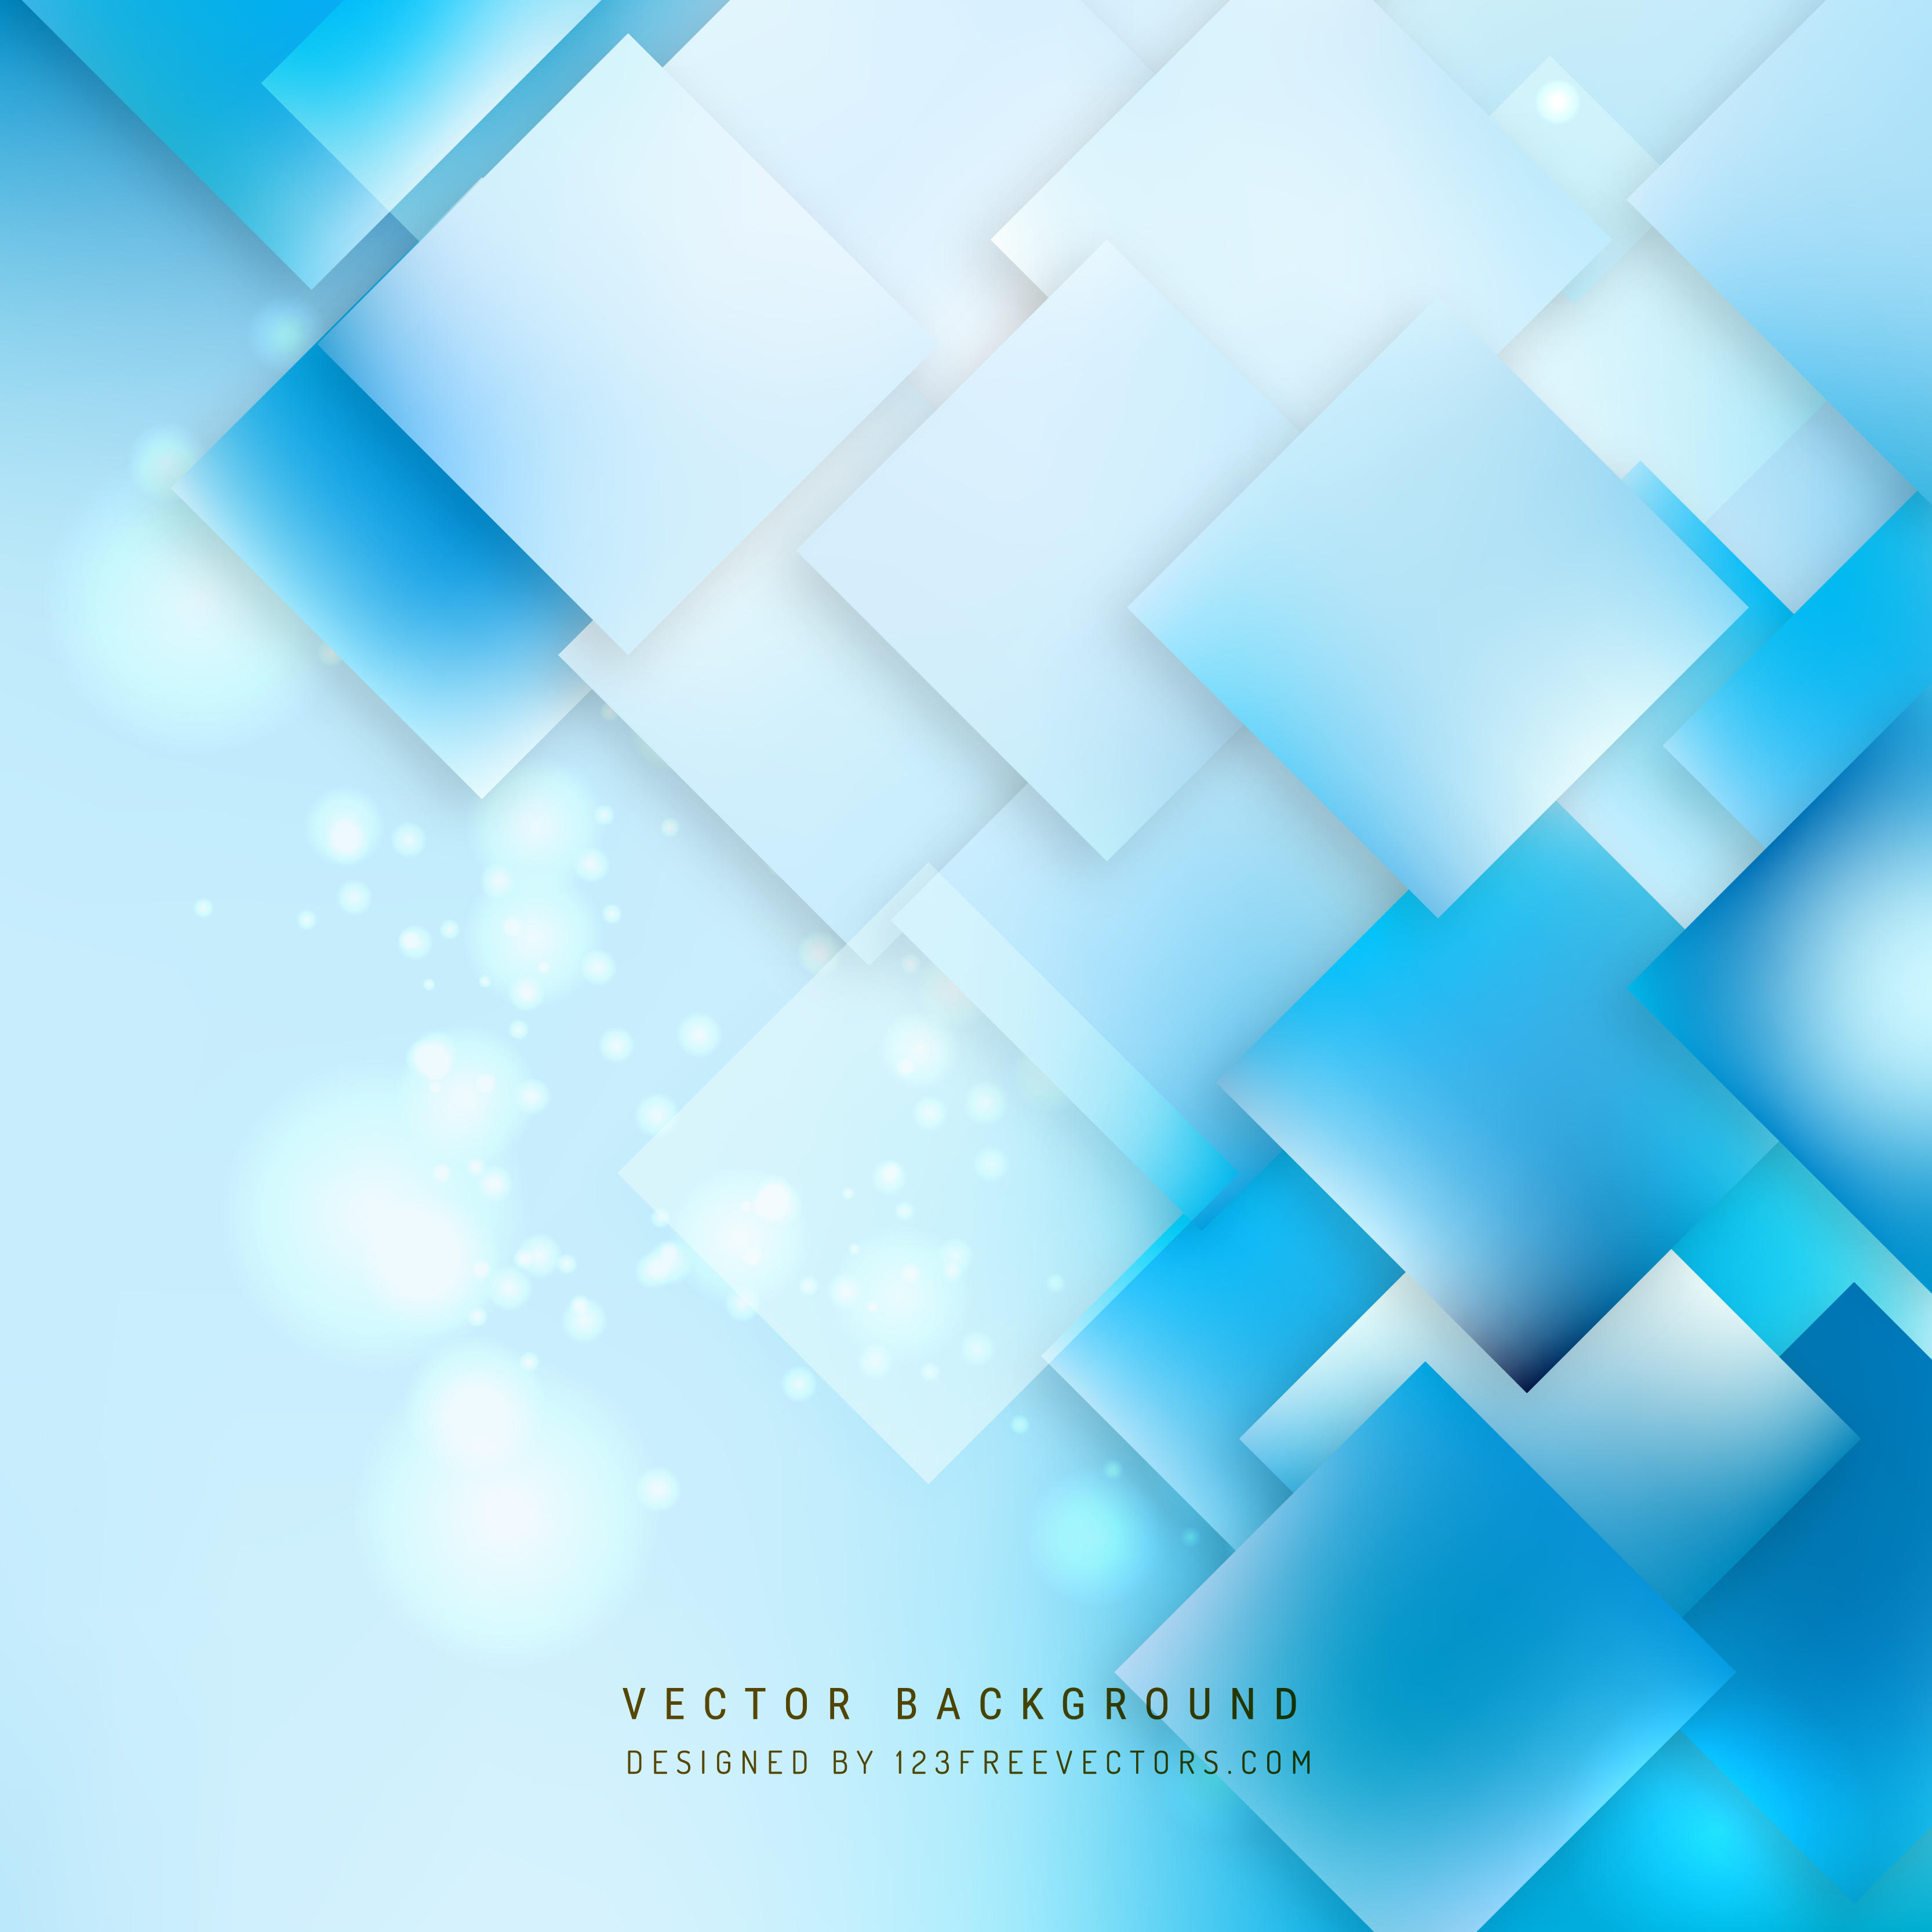 Abstract Light Blue Square Background Template | 123Freevectors